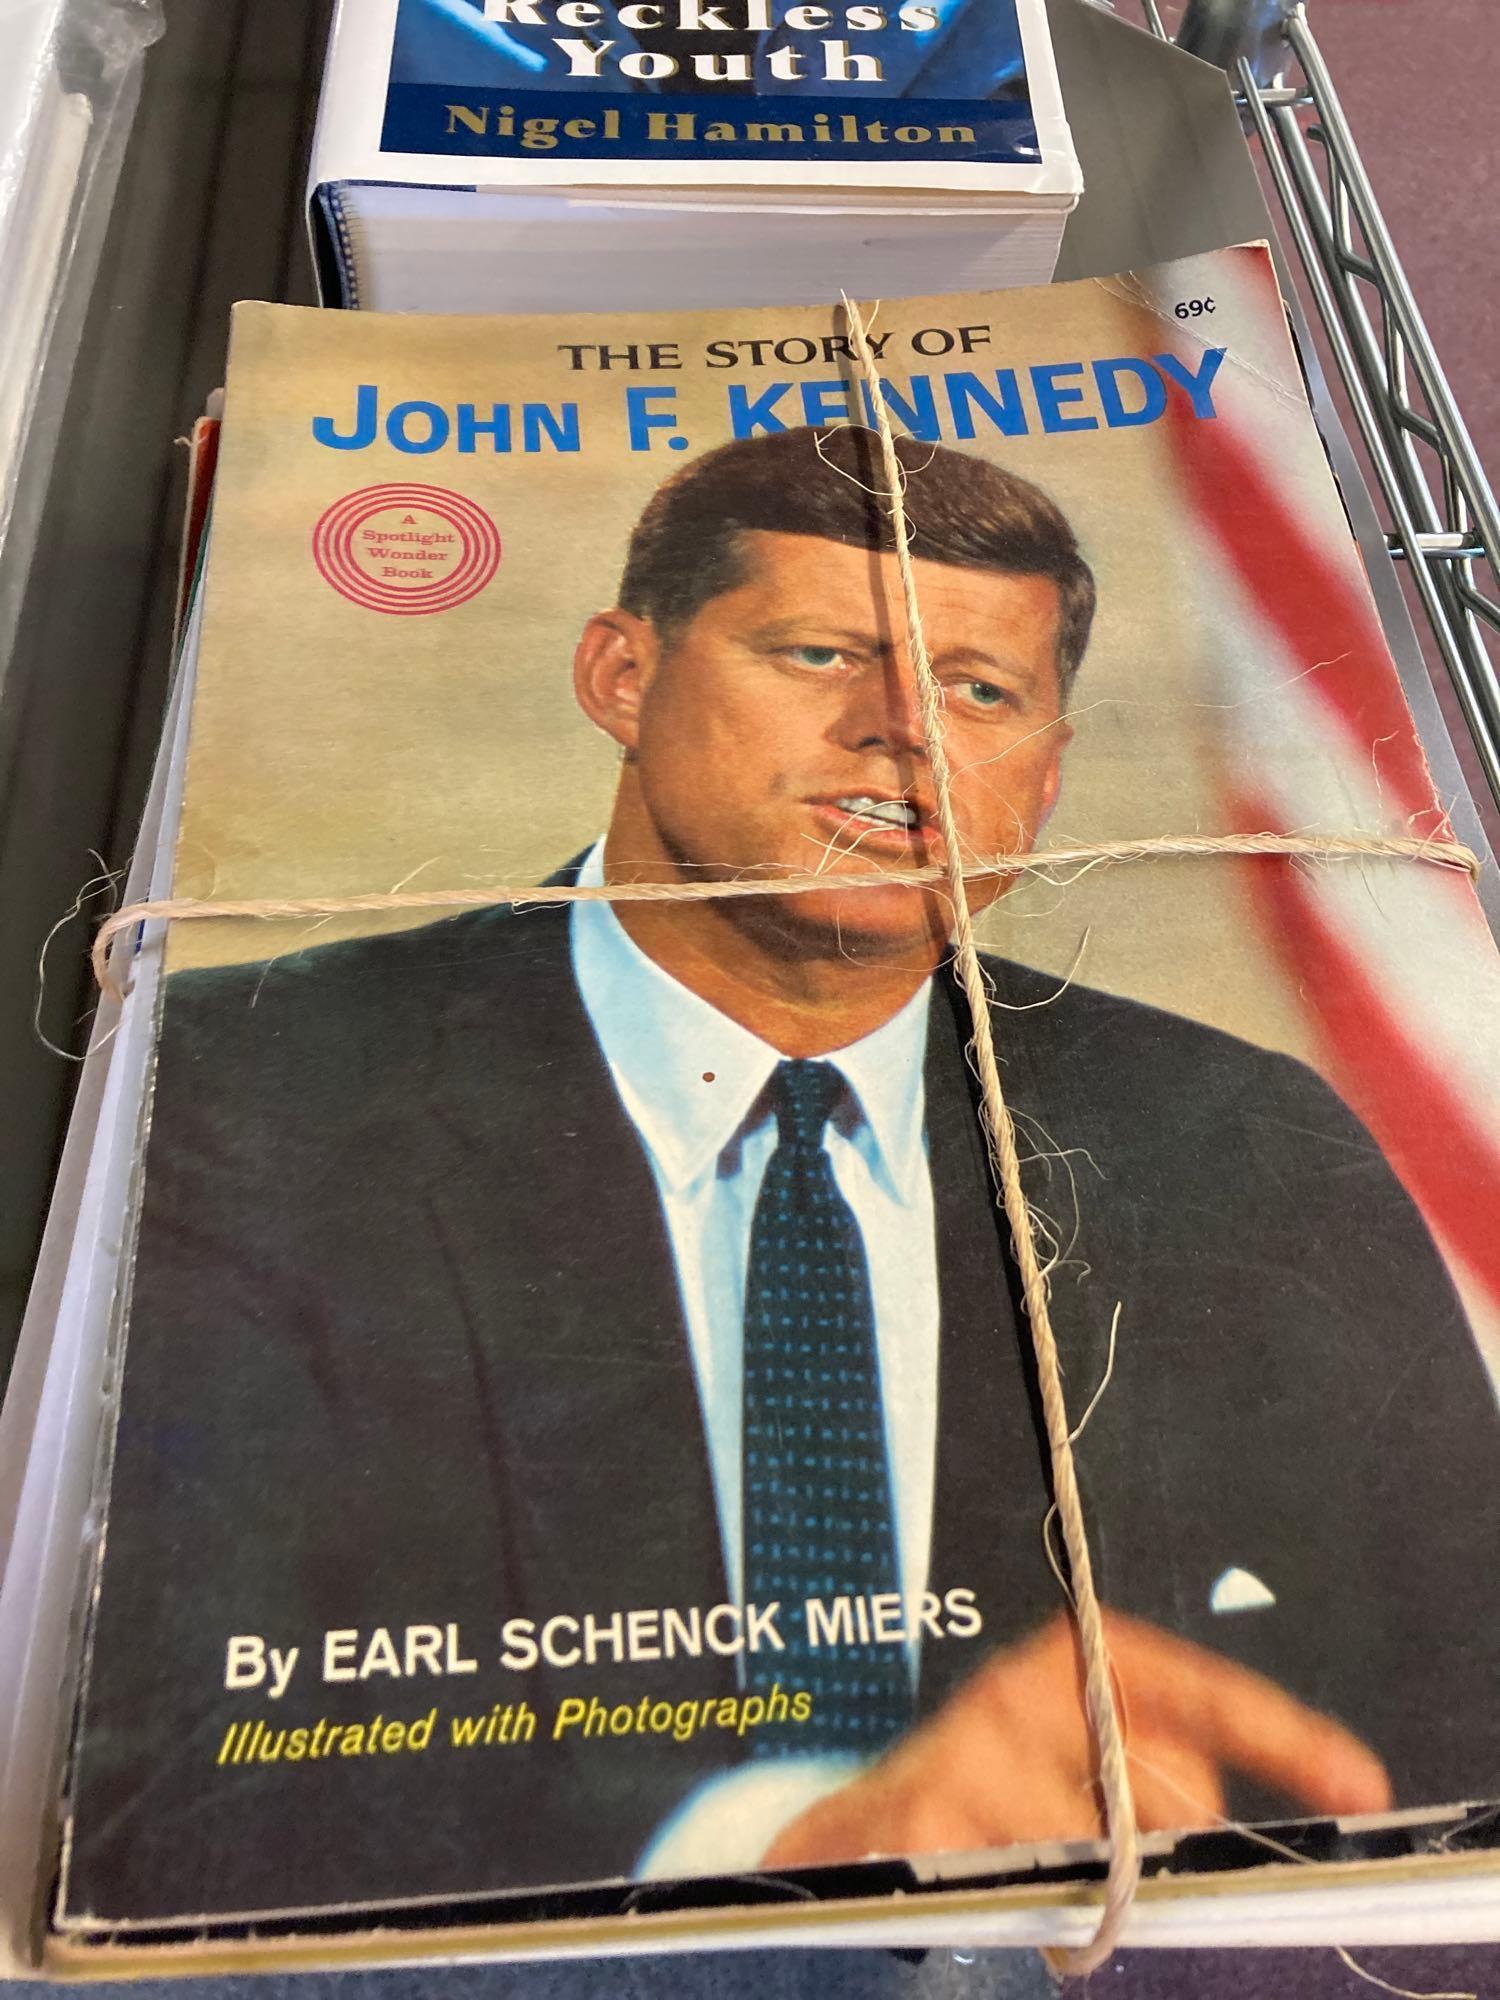 U.S. Navy book, JFK book and magazines and other vintage magazines